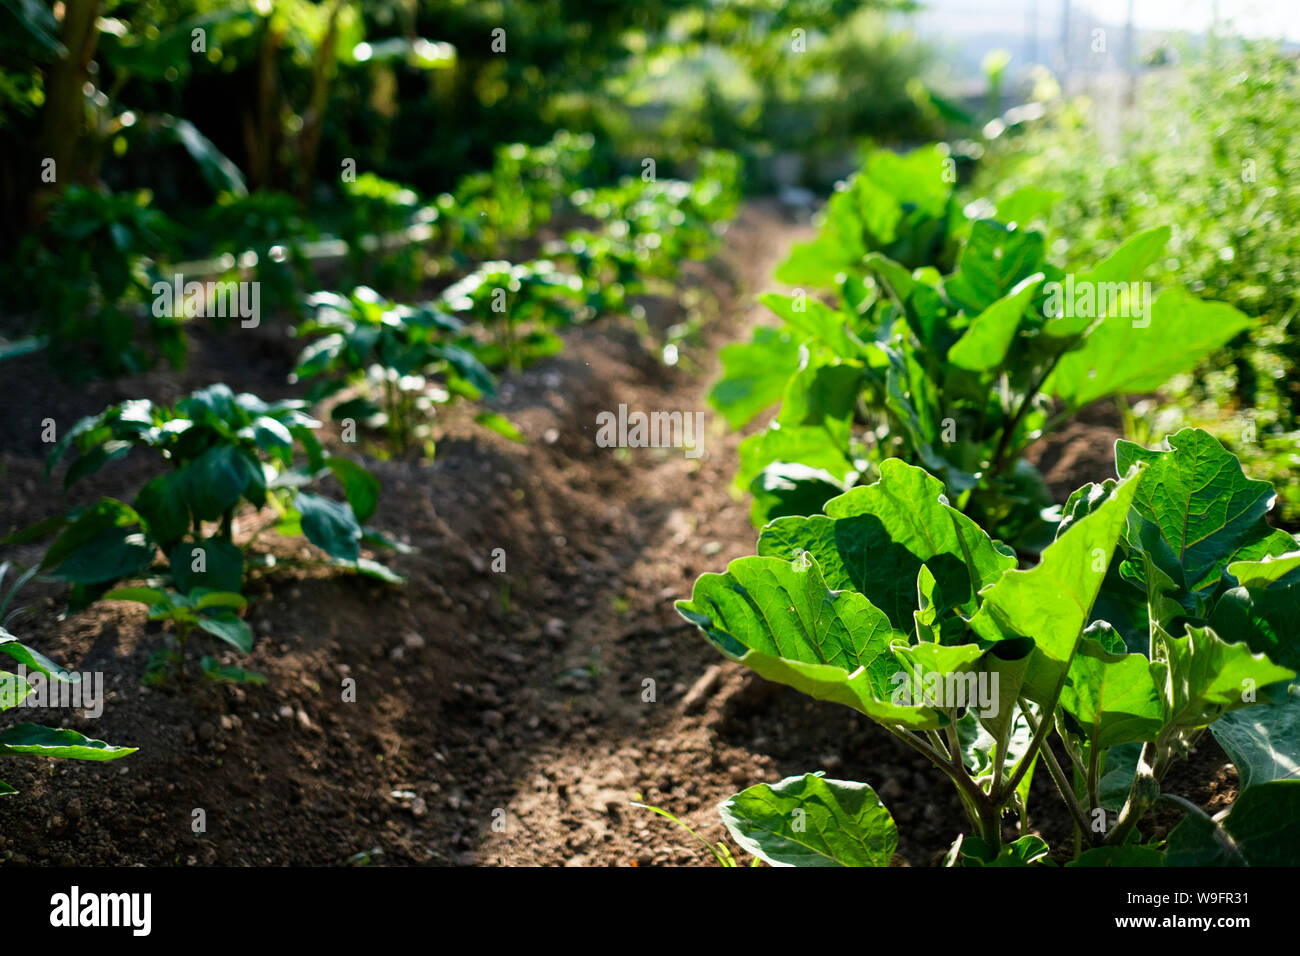 Eggplant (Aubergine) and potato plants growing in a vegetable garden in Kefalonia, Greece. Stock Photo